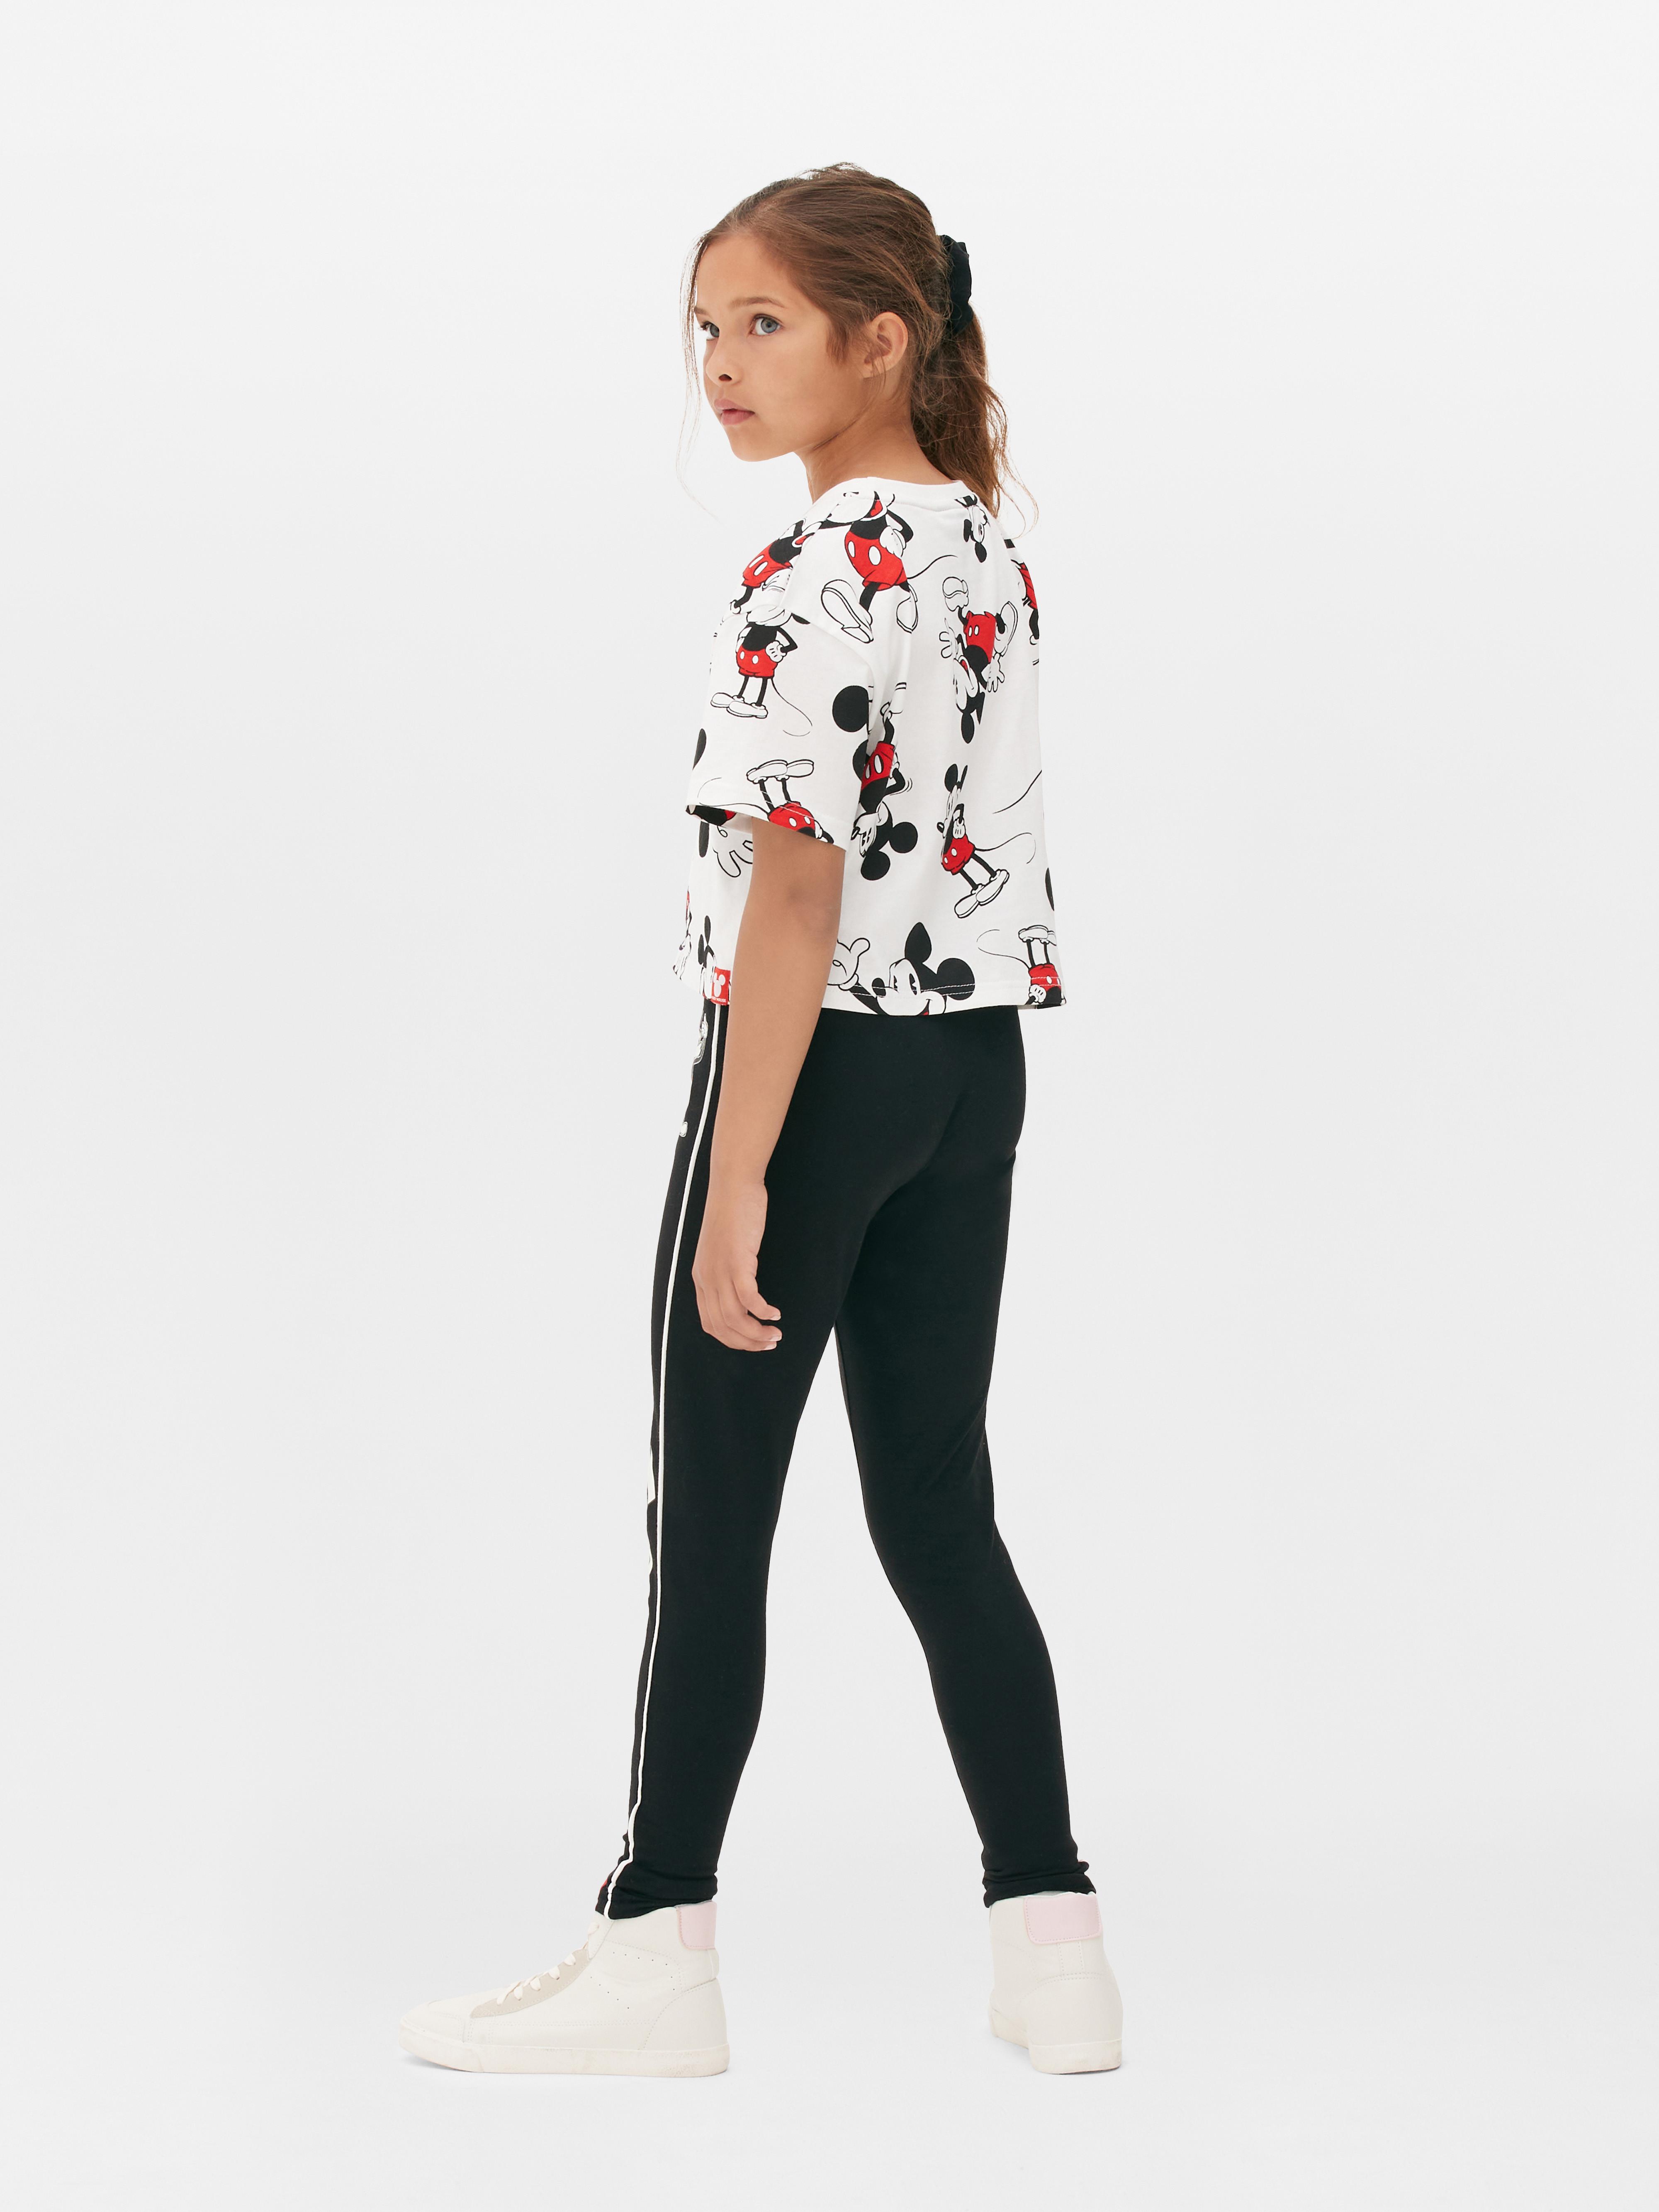 Disney's Mickey Mouse Co-ord T-shirt and Leggings Set